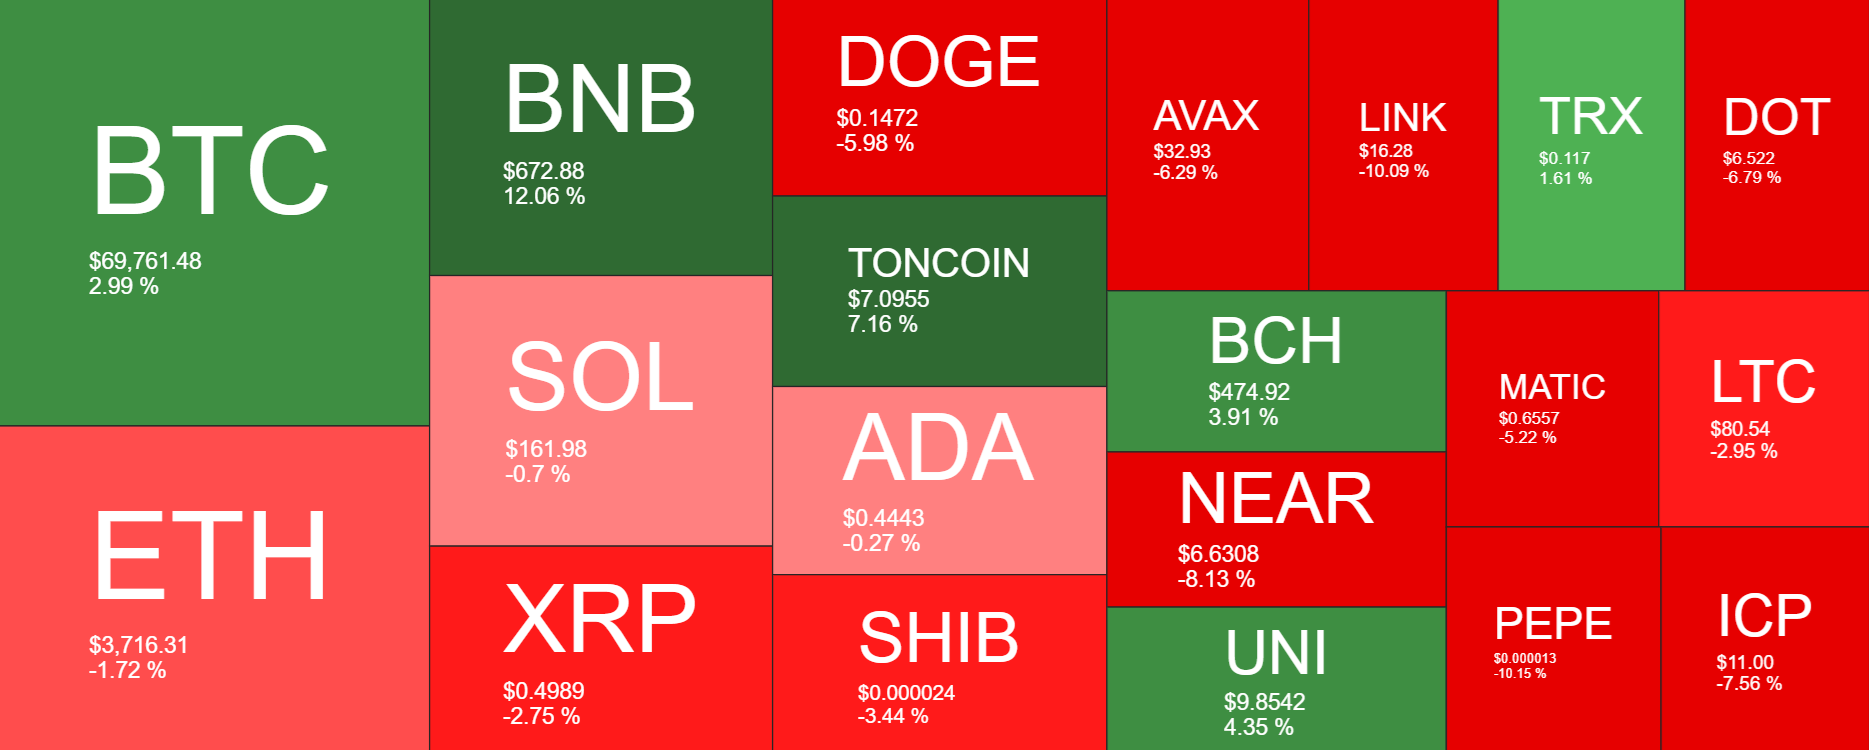 Market research report: Bitcoin at 69k as rate fears mount, overshadowing a record ETF inflow streak - heatmap 2